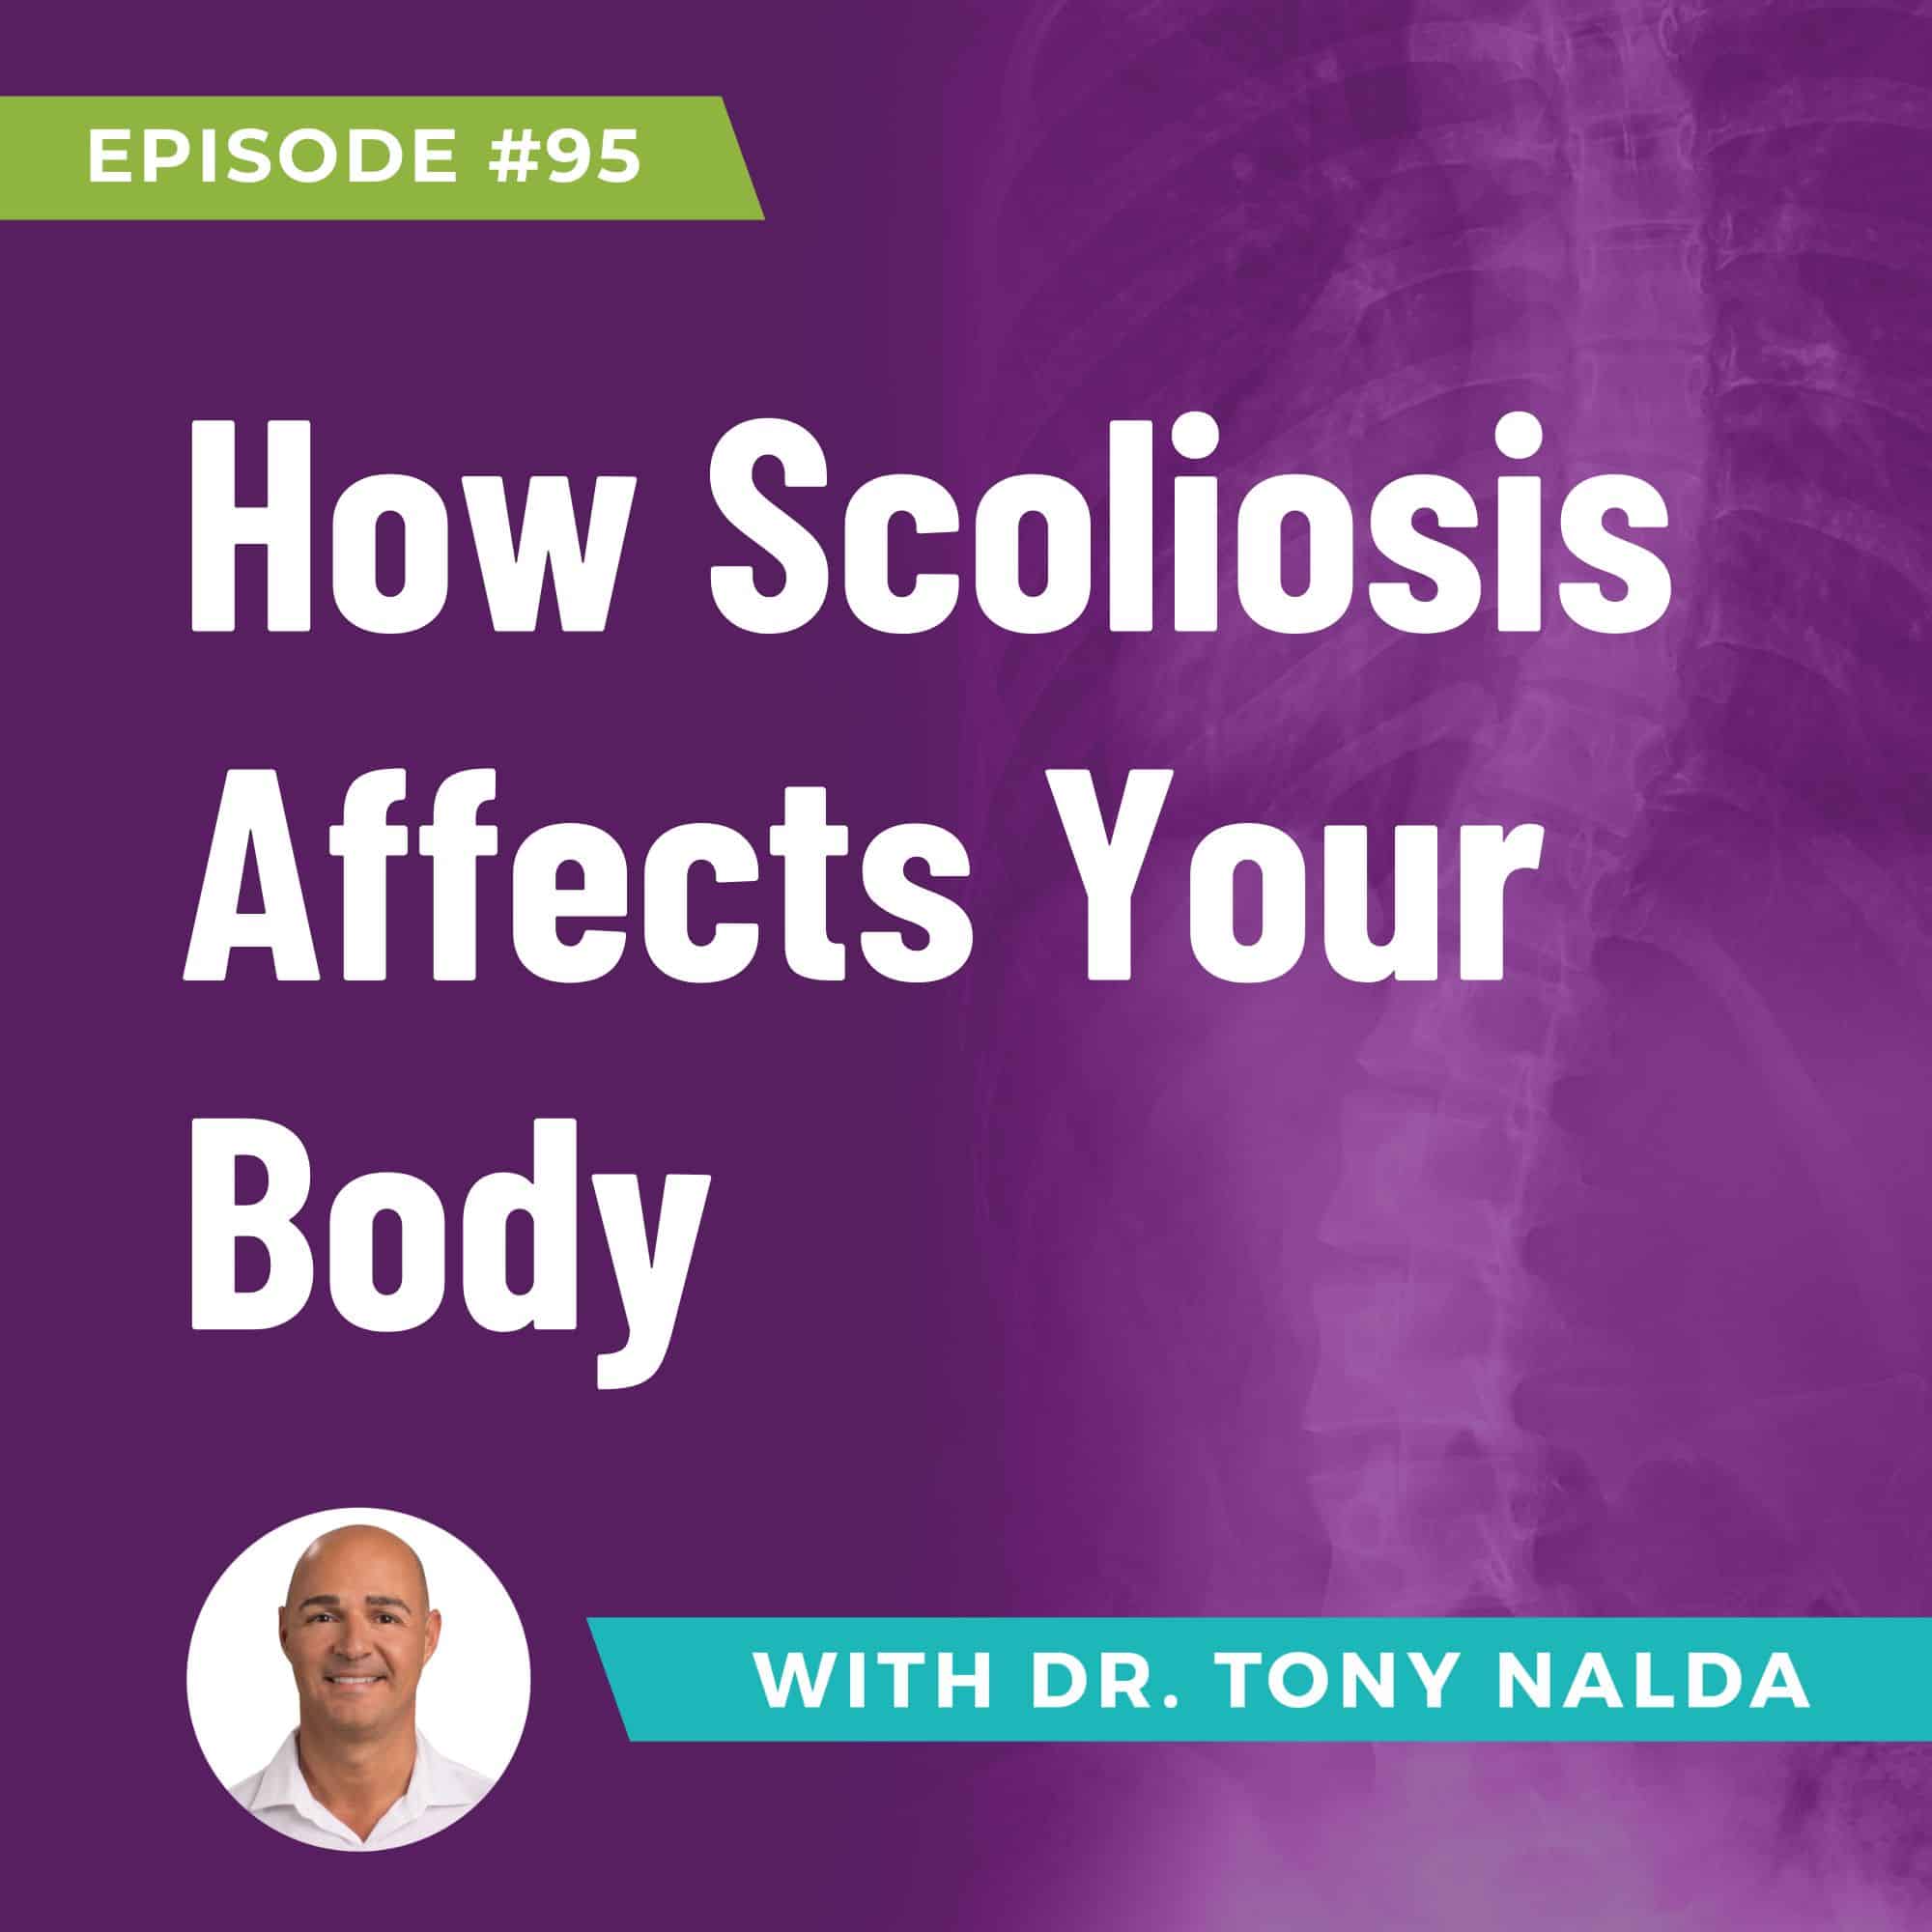 How Scoliosis Affects Your Body